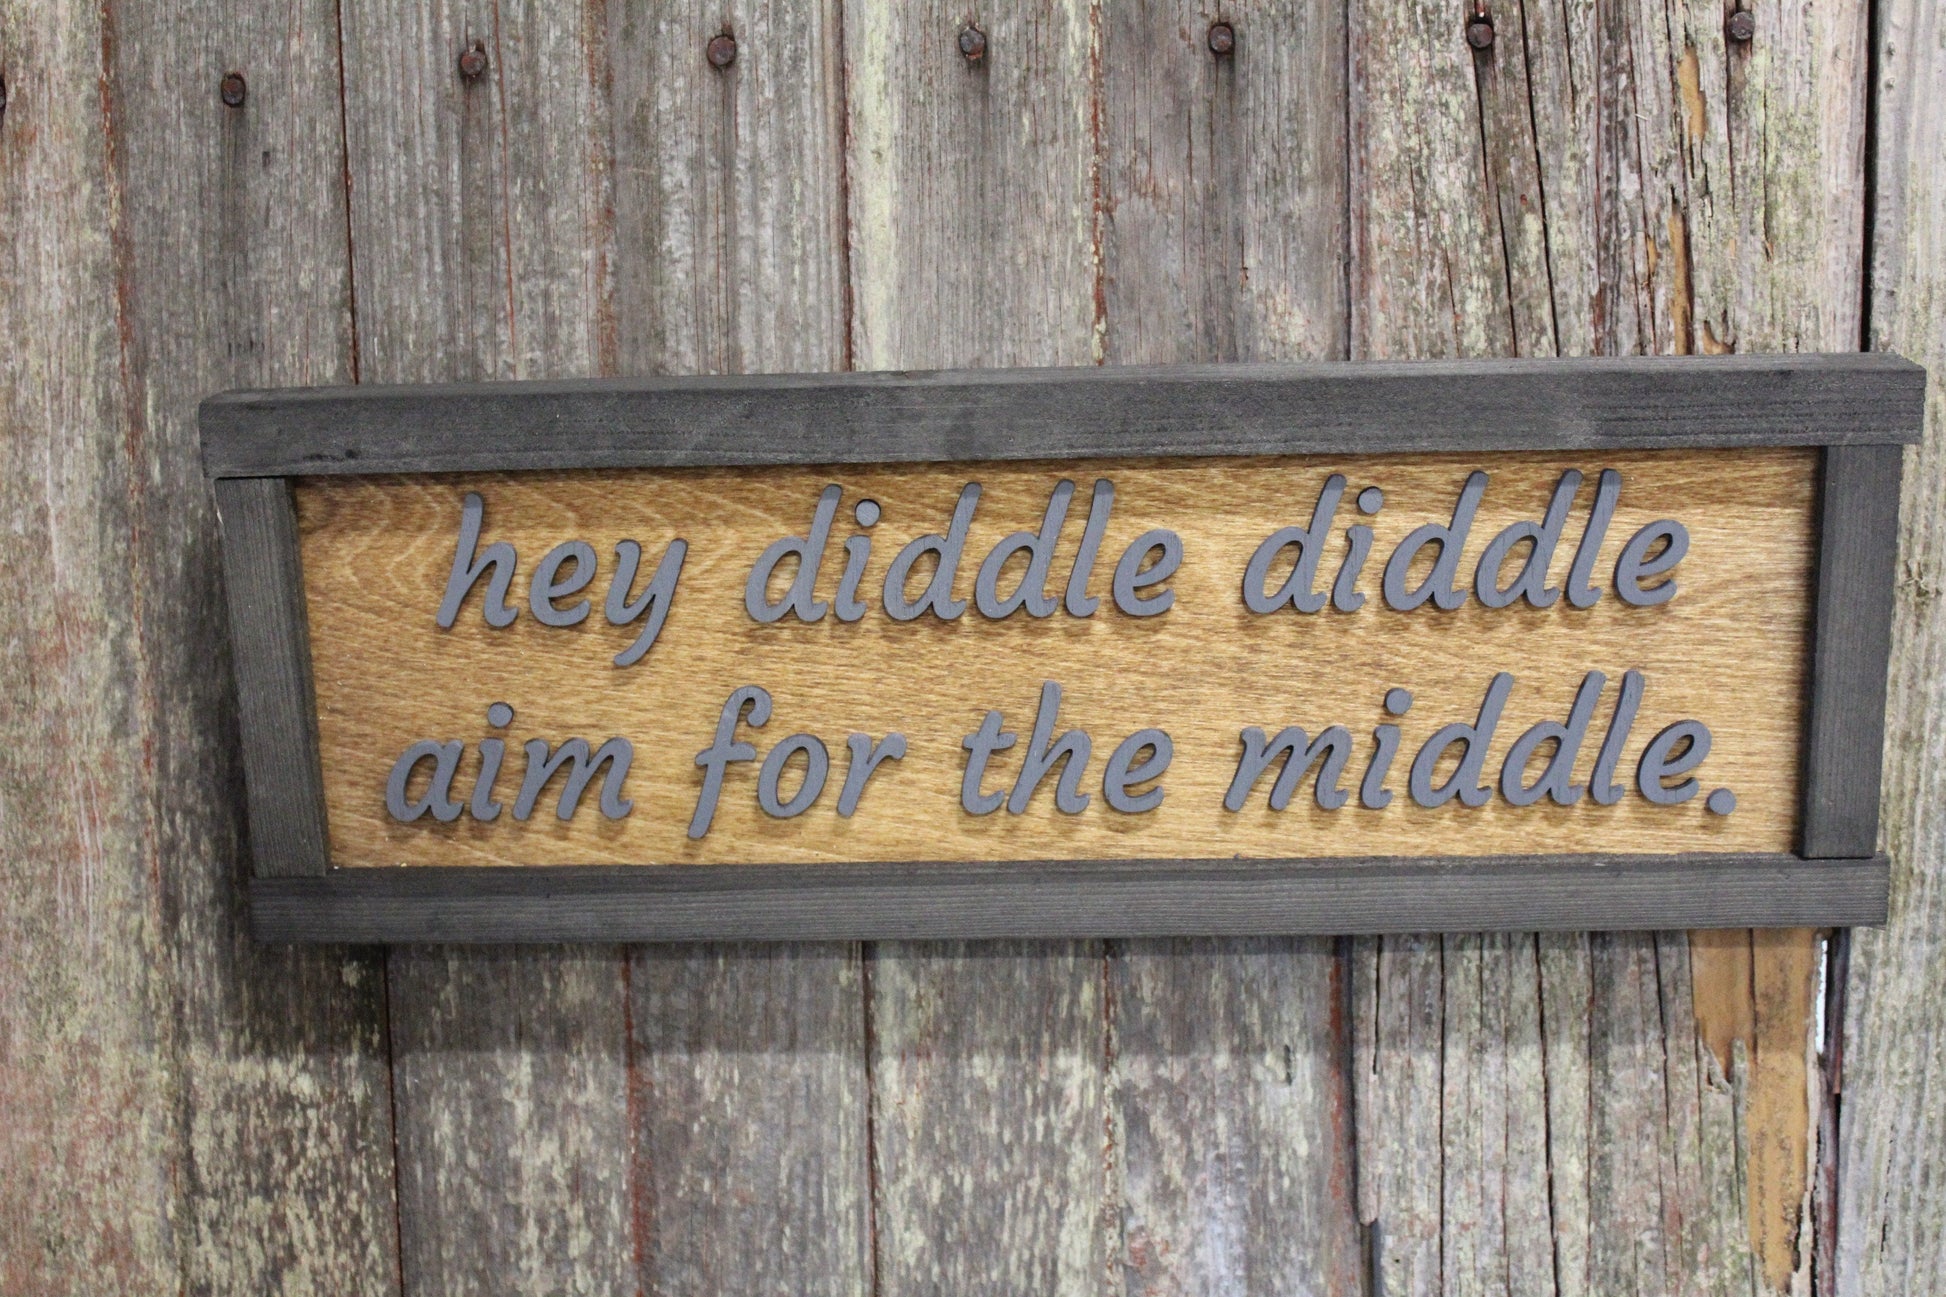 Fathers Day Gift Bathroom Joke Hey Diddle Diddle Aim For The Middle Bathroom Wood Sign Dad Silly Raised Text Farmhouse Handmade Rustic